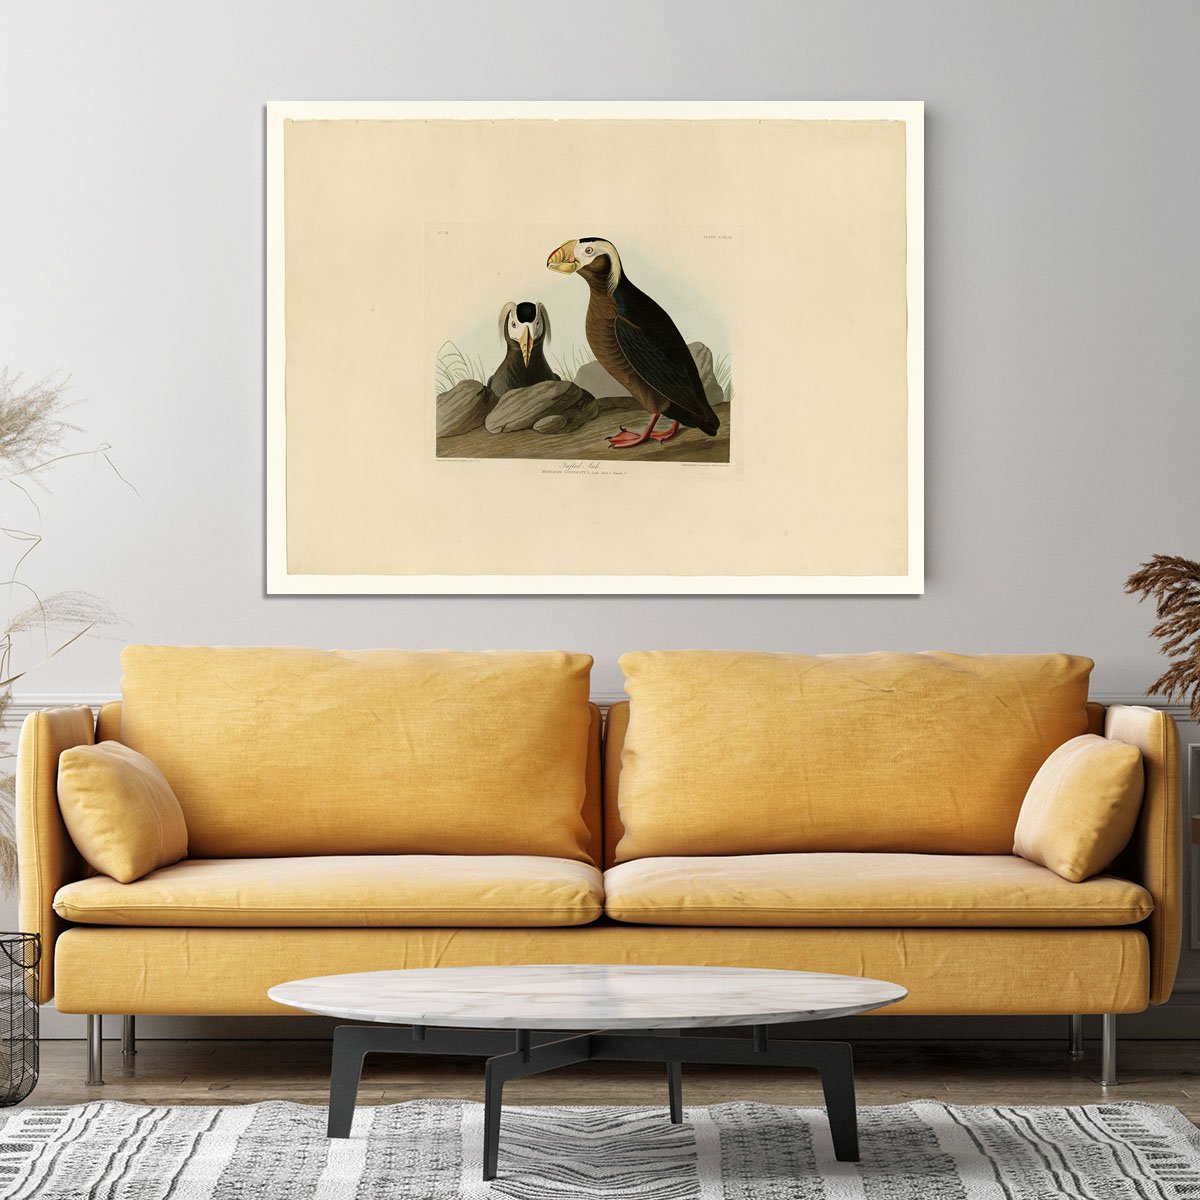 Tufted Auk by Audubon Canvas Print or Poster